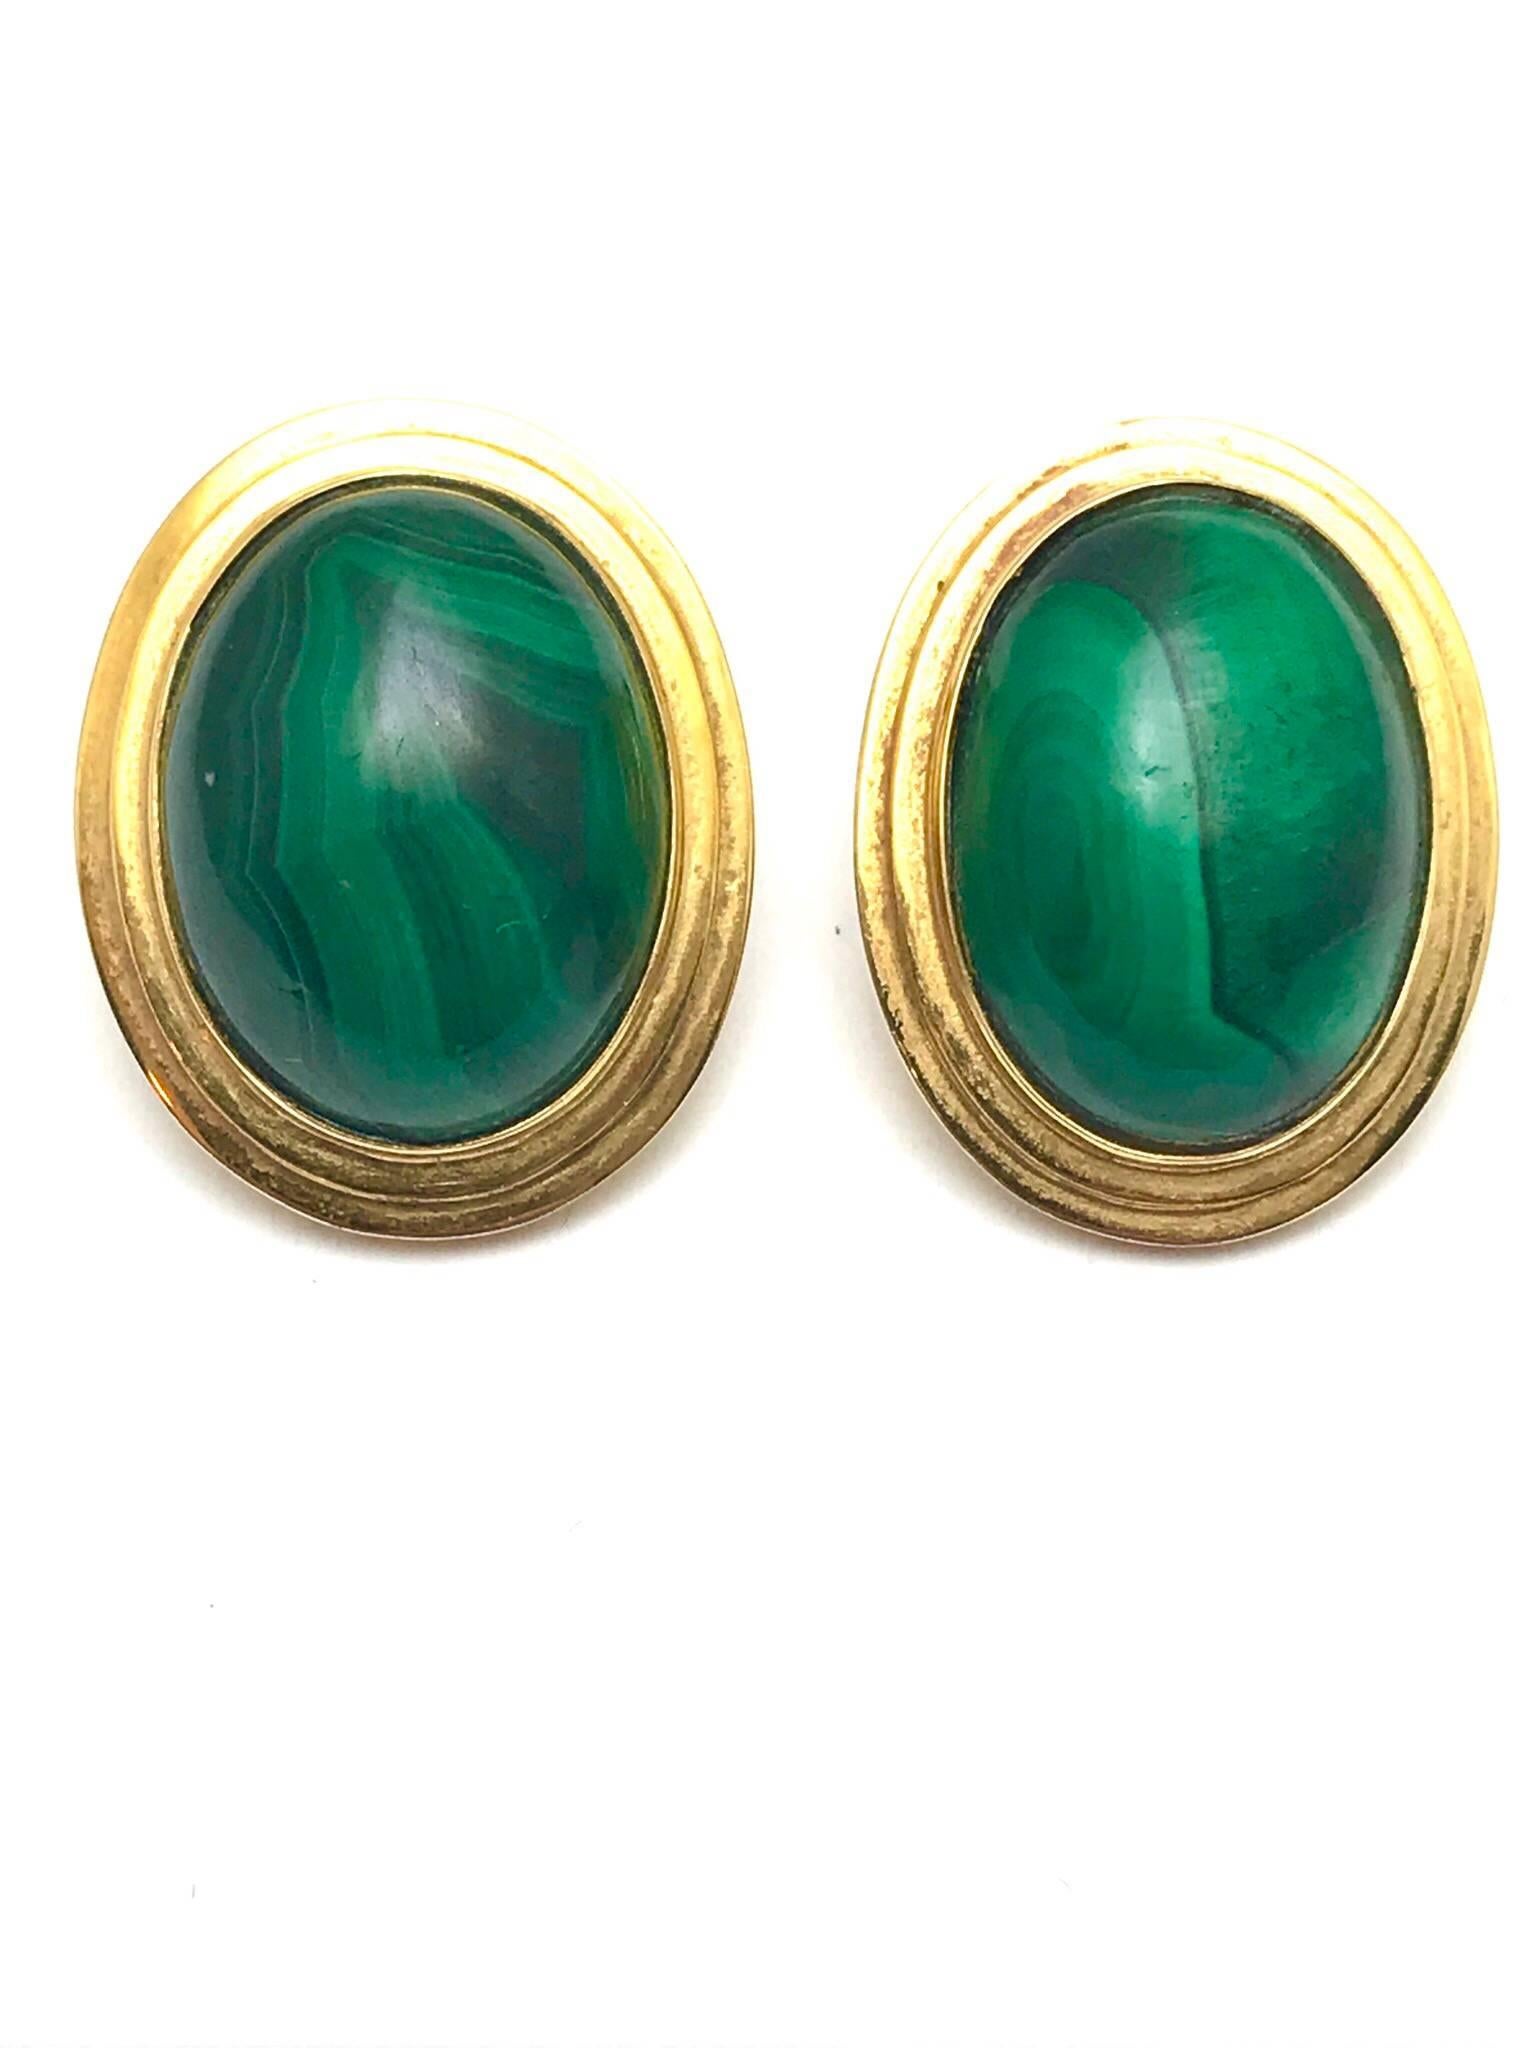 A pair of malachite and 14 karat yellow gold clip on earrings.  The malachite has a smooth domes finish, with a two tiered yellow gold frame and clip back.  (a post can be put on).

Hallmark:  14K